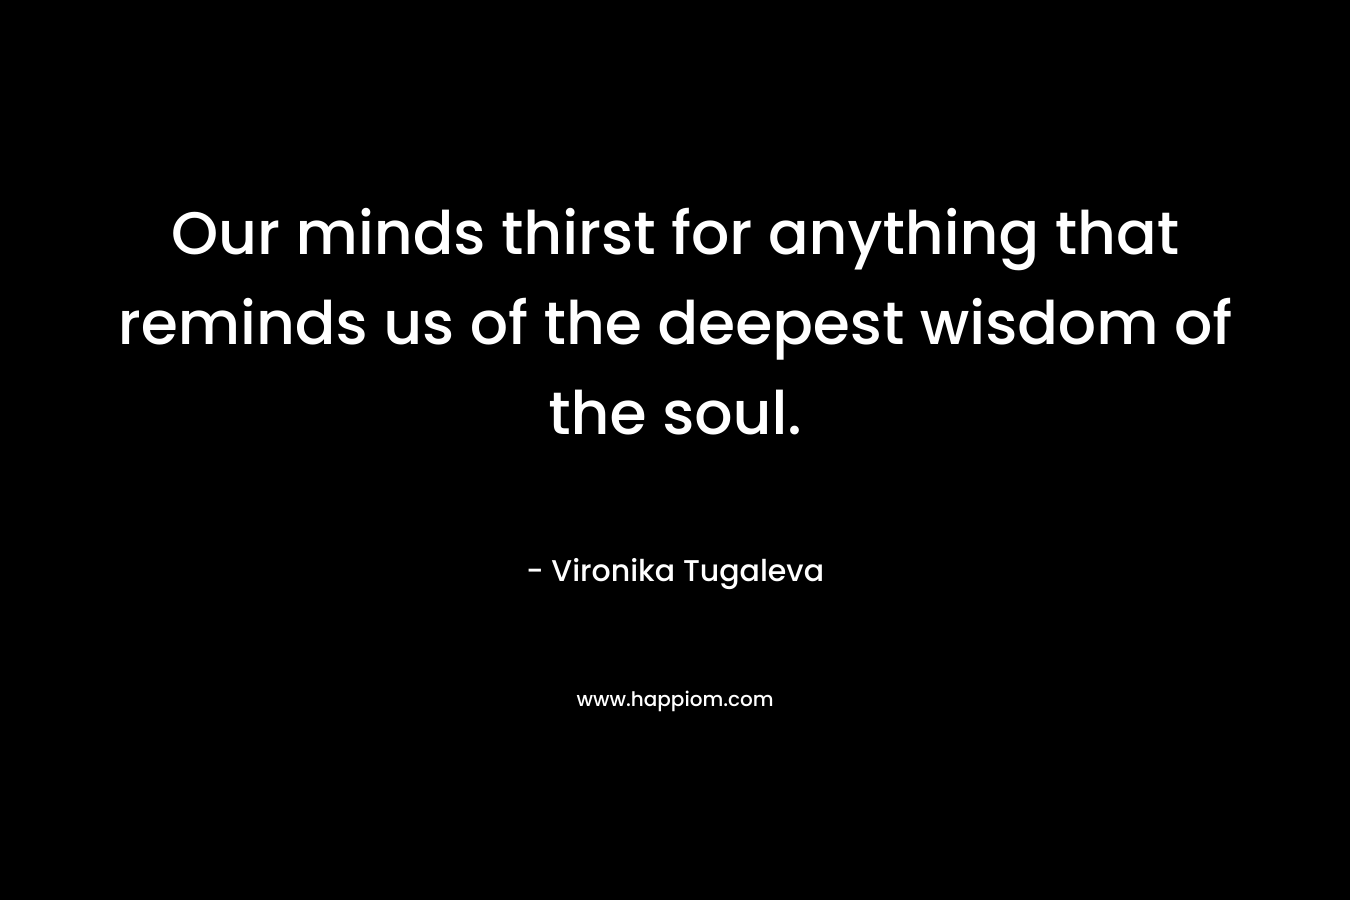 Our minds thirst for anything that reminds us of the deepest wisdom of the soul. – Vironika Tugaleva